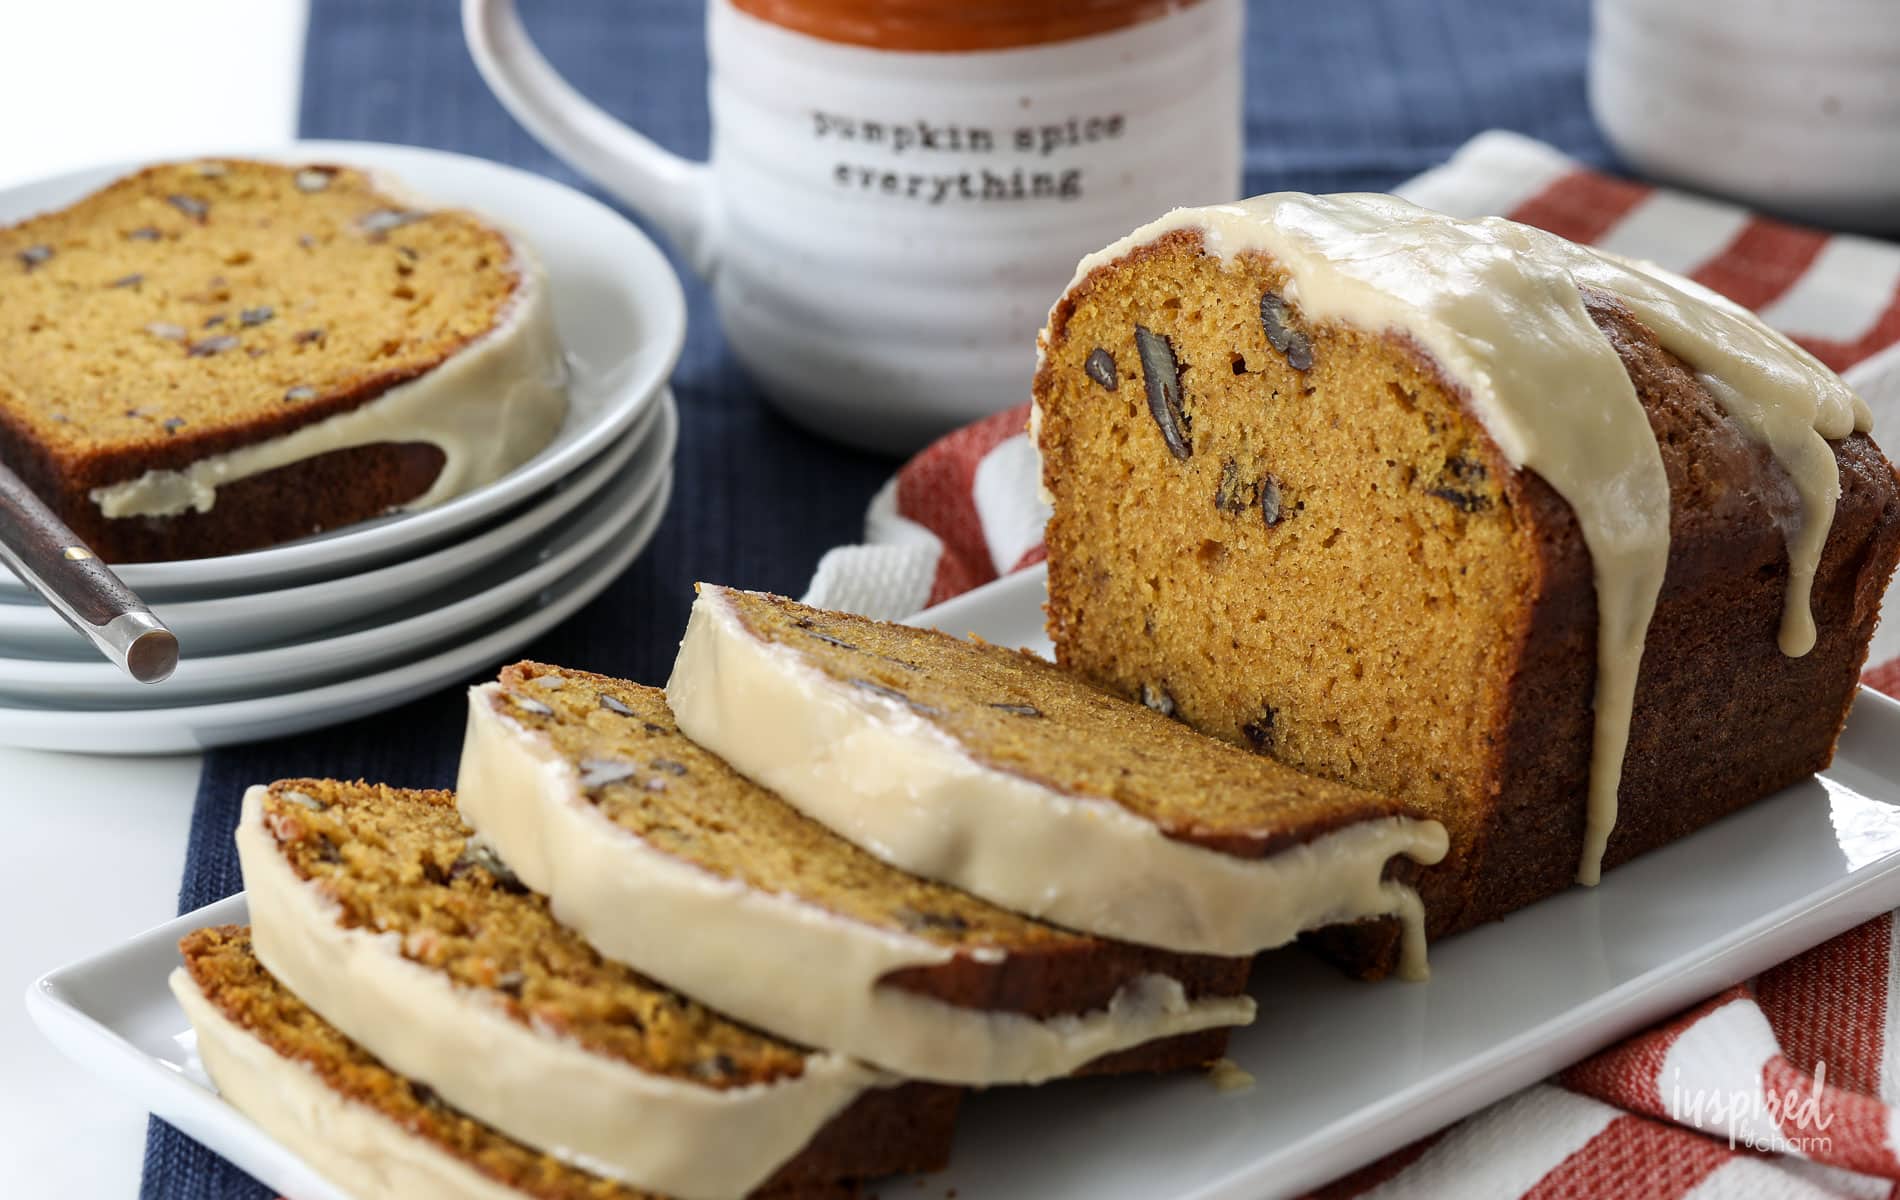 This Really Good Pumpkin Bread recipe is a delicious fall dessert recipe. #pumpkin #bread #recipe #pumpkin #spice #fallbaking #dessert #loaf